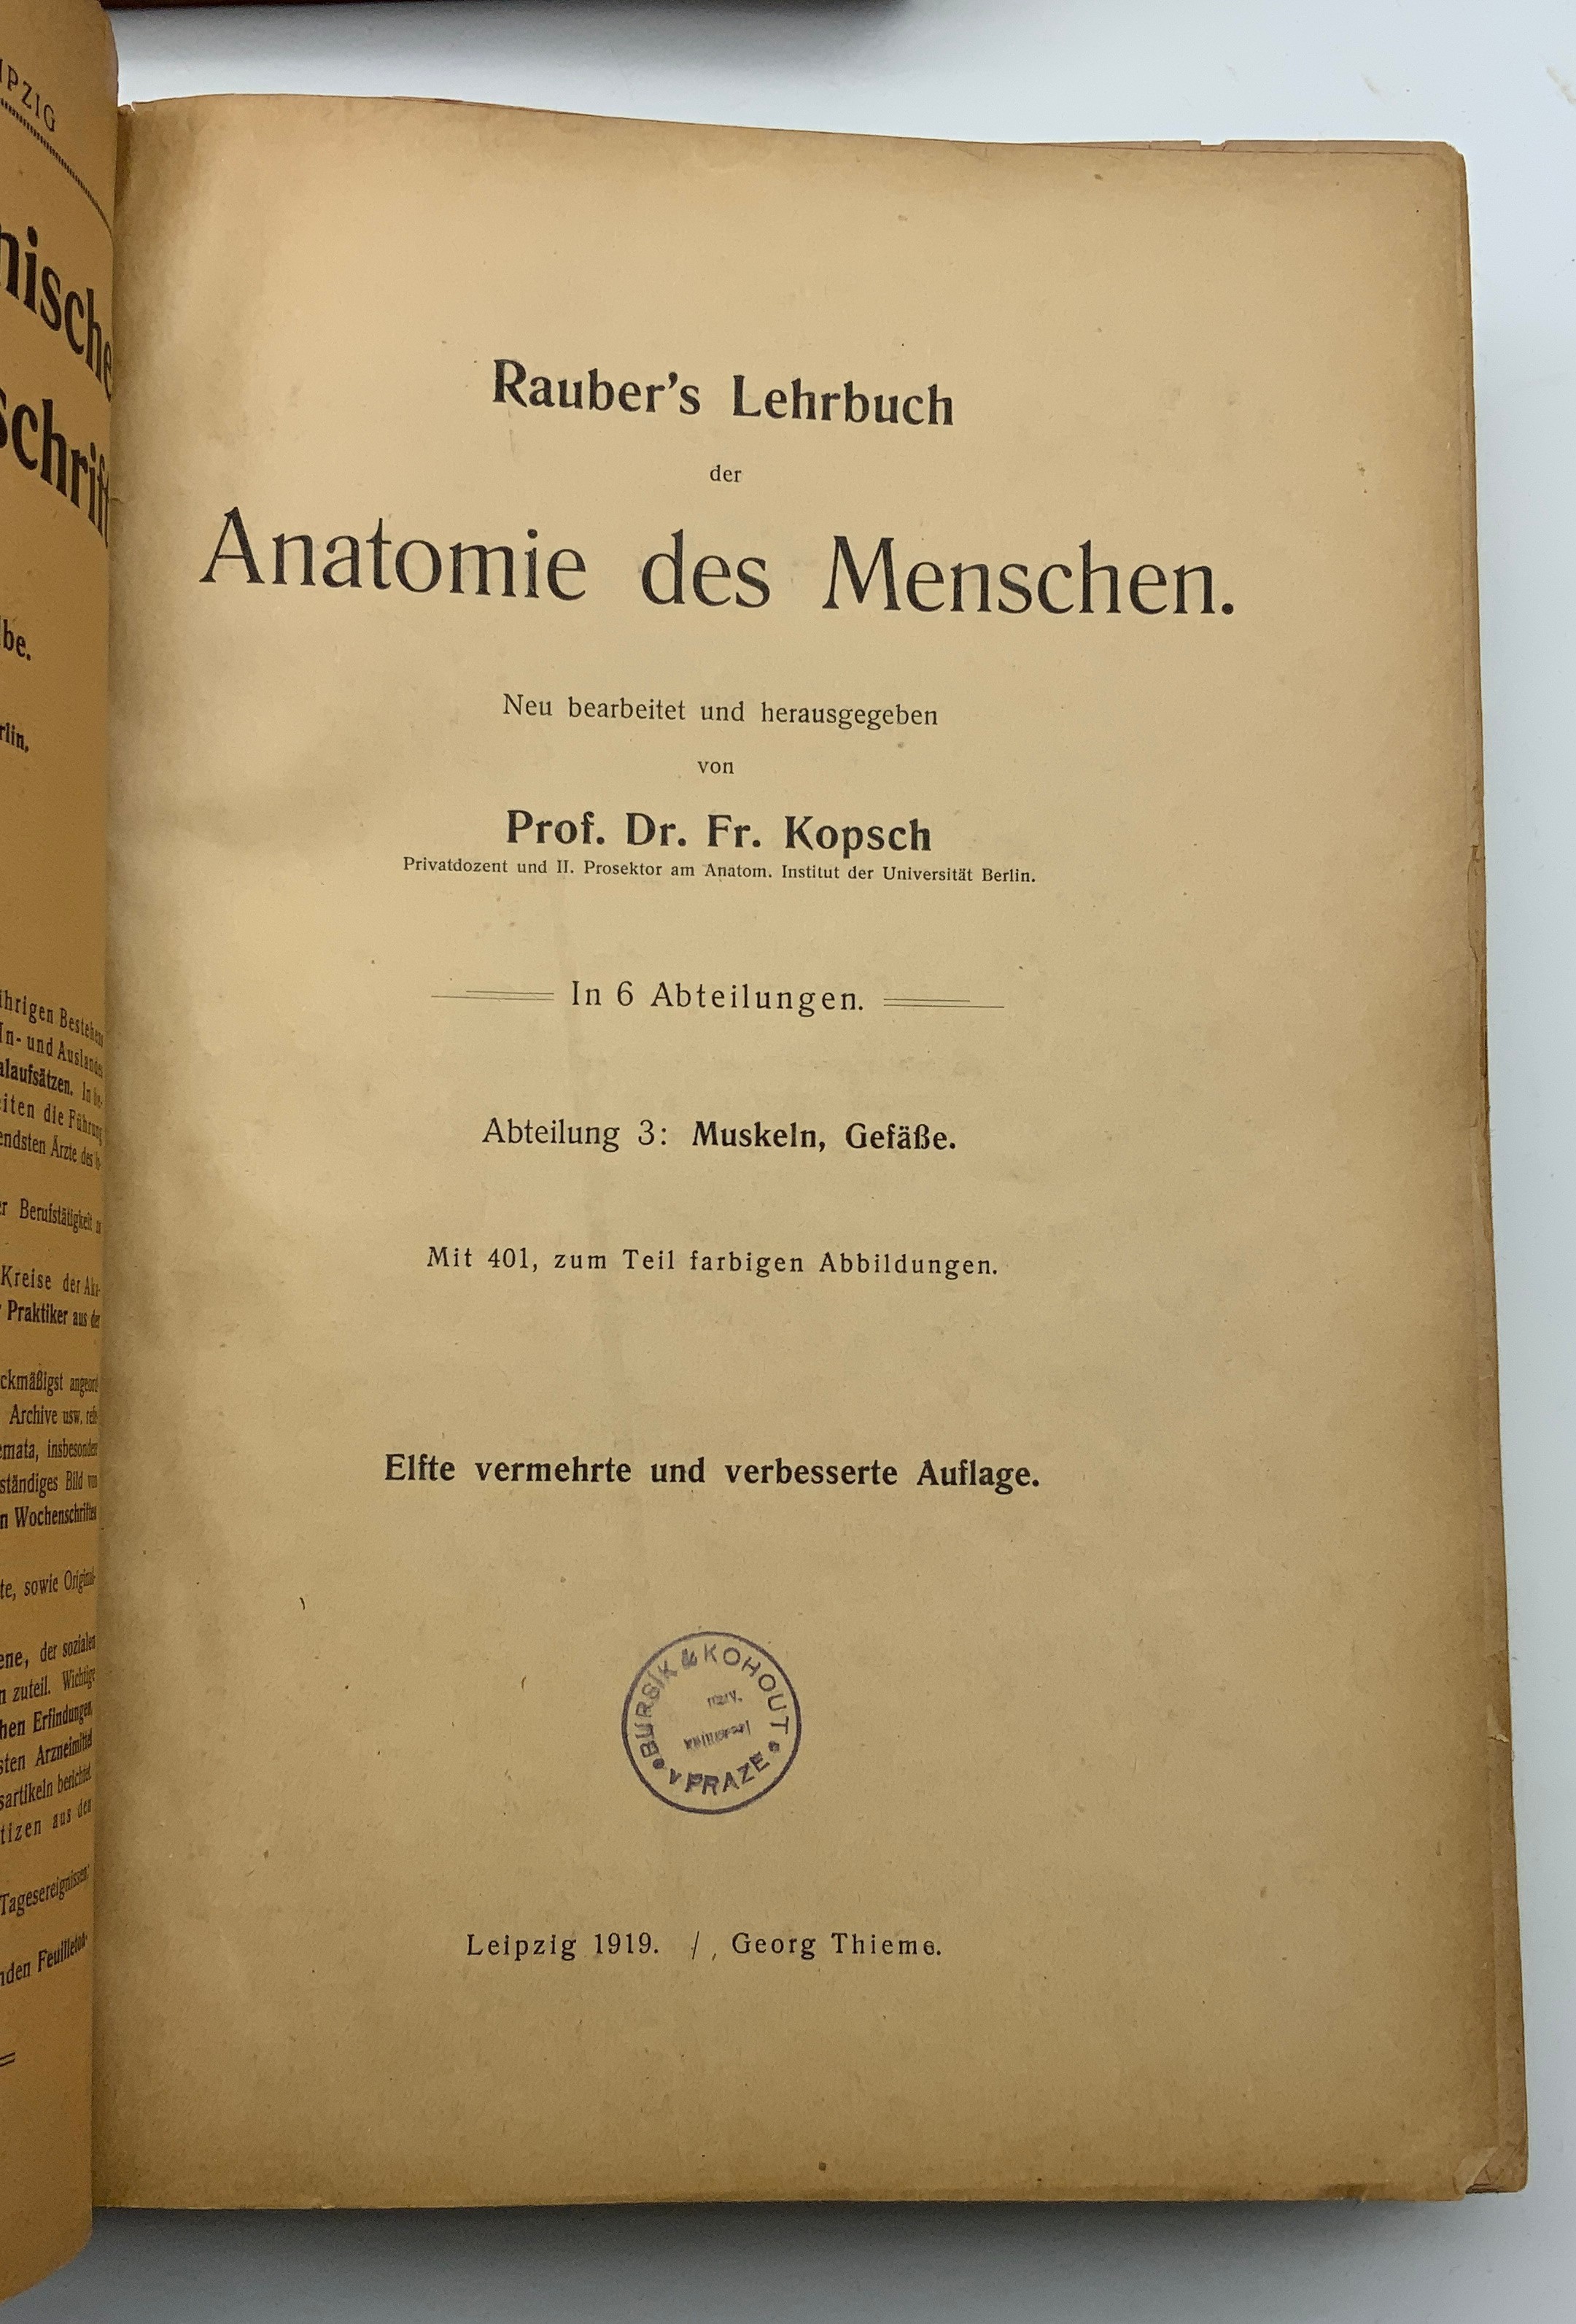 SET OF MEDICAL ANATOMY BOOKS (GERMAN) FROM the 1920s - Image 4 of 7